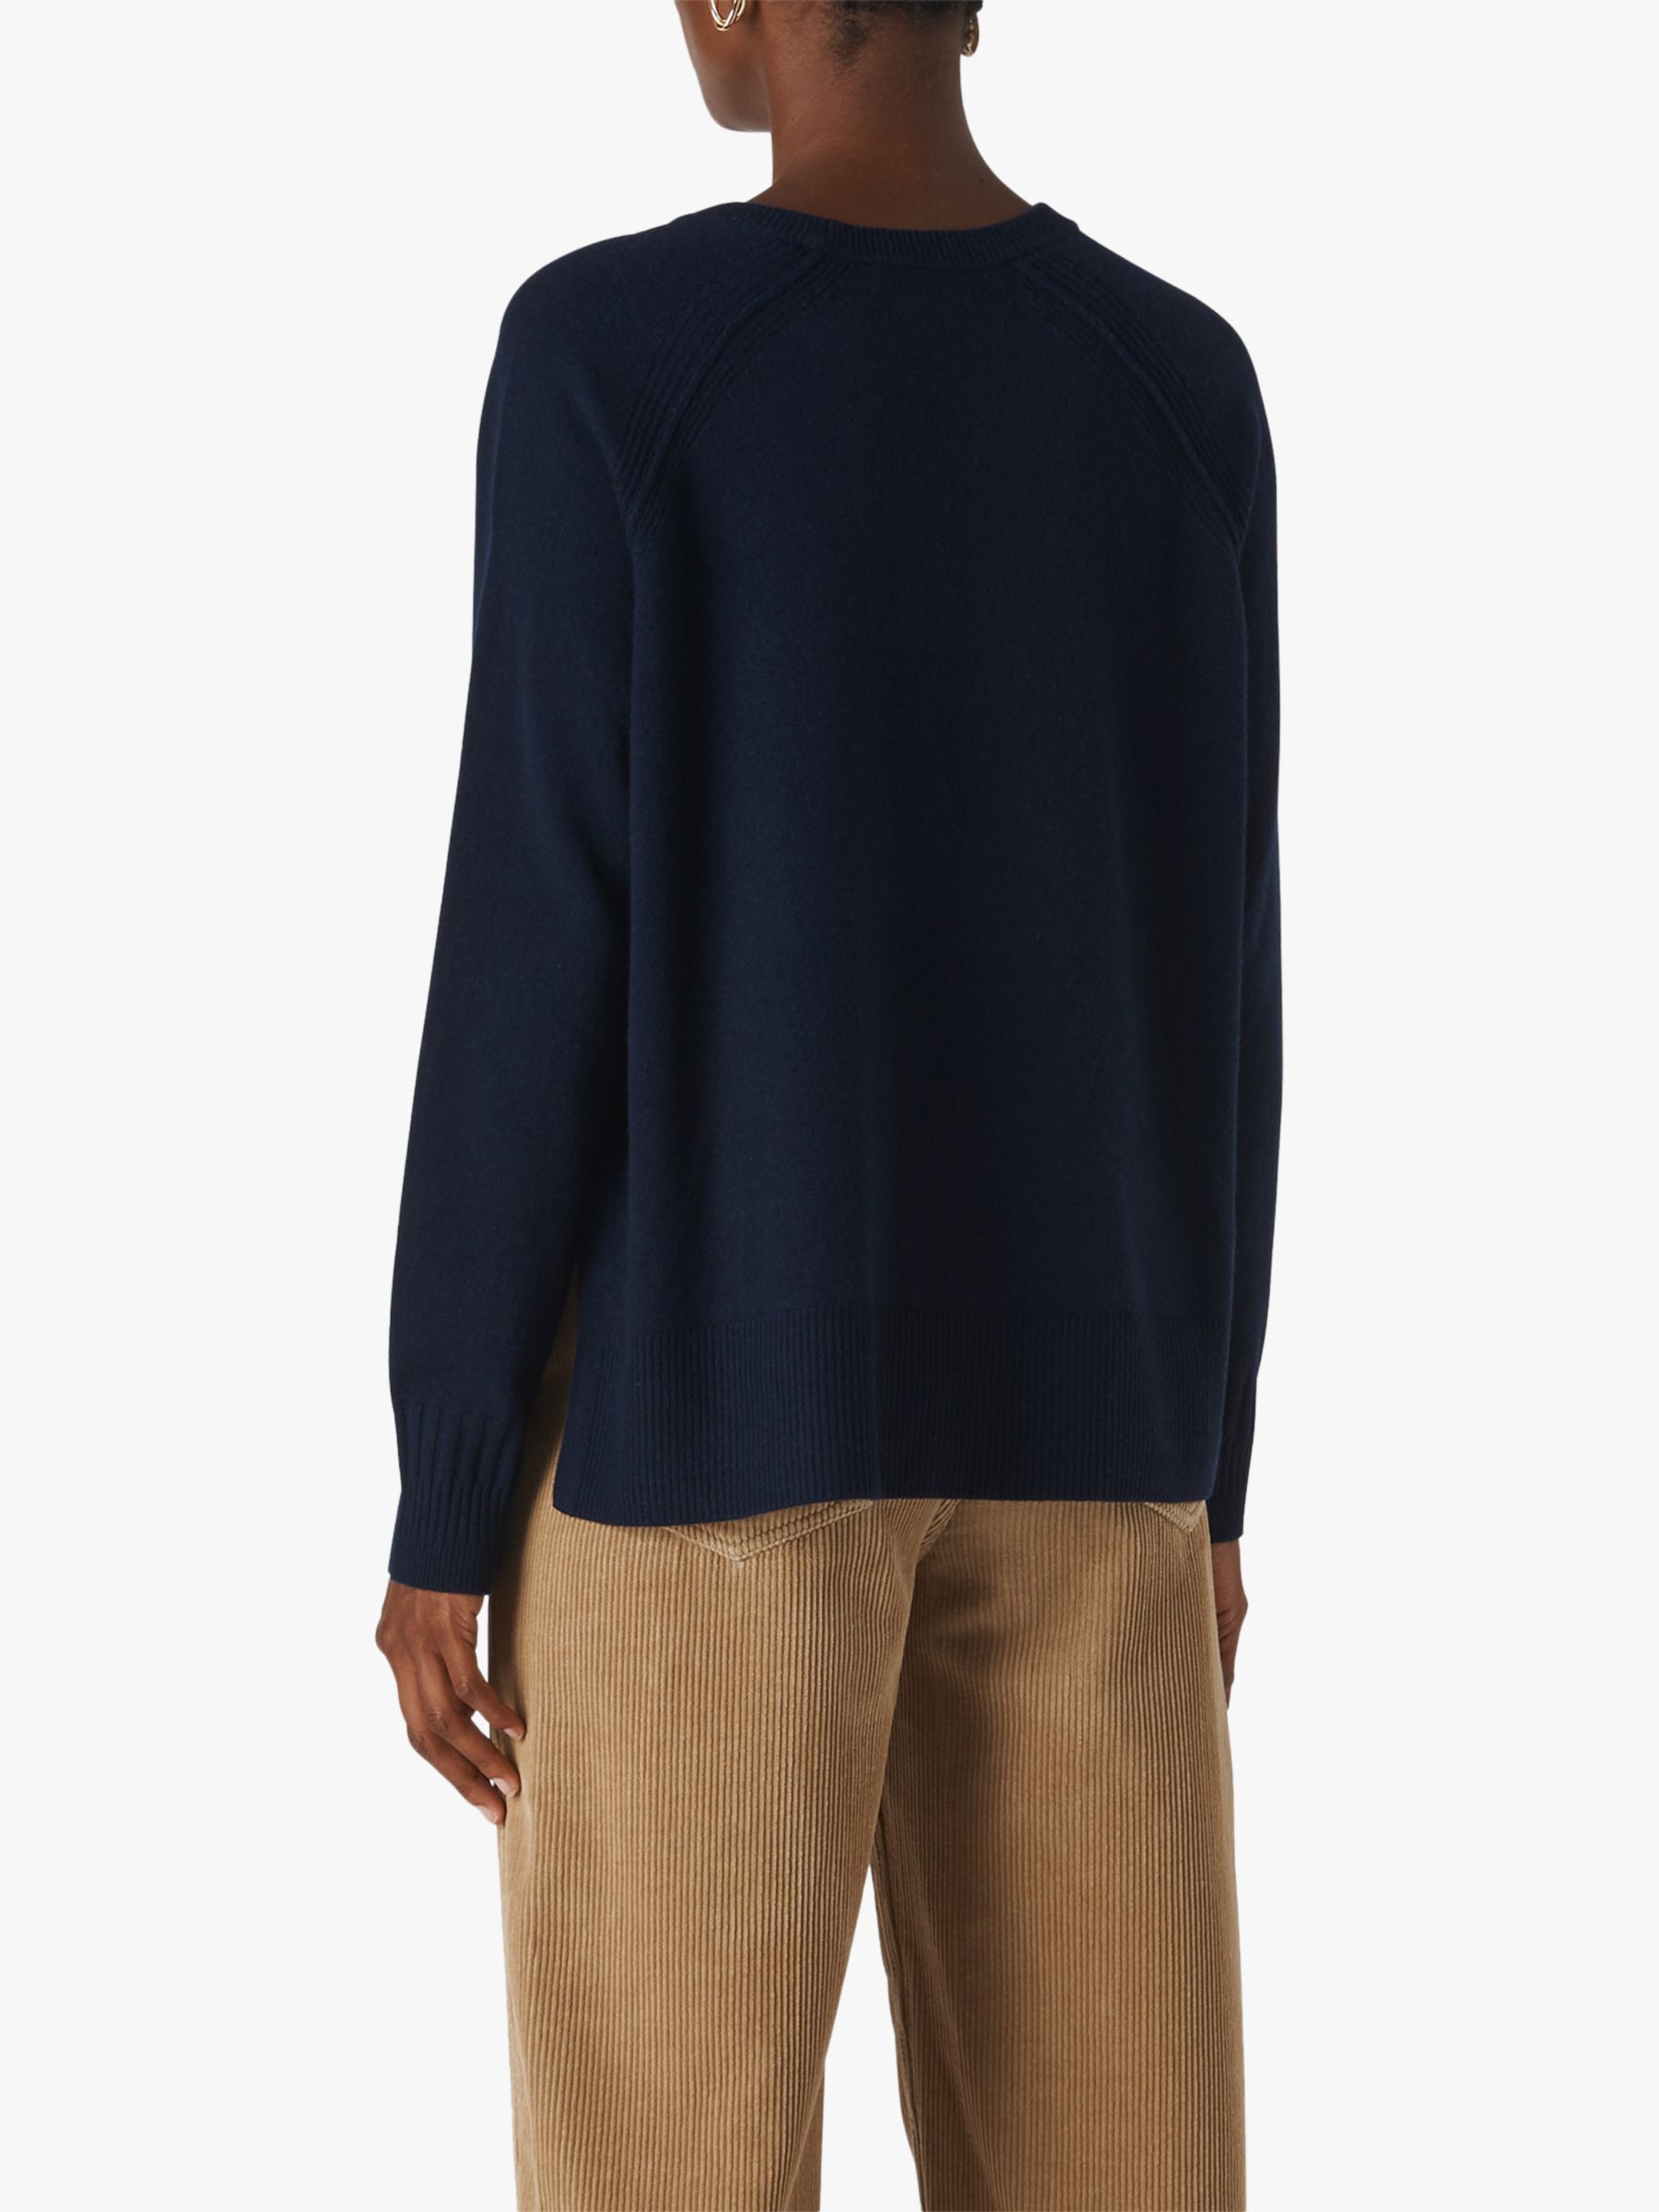 Whistles Cashmere Crew Neck Jumper at John Lewis & Partners